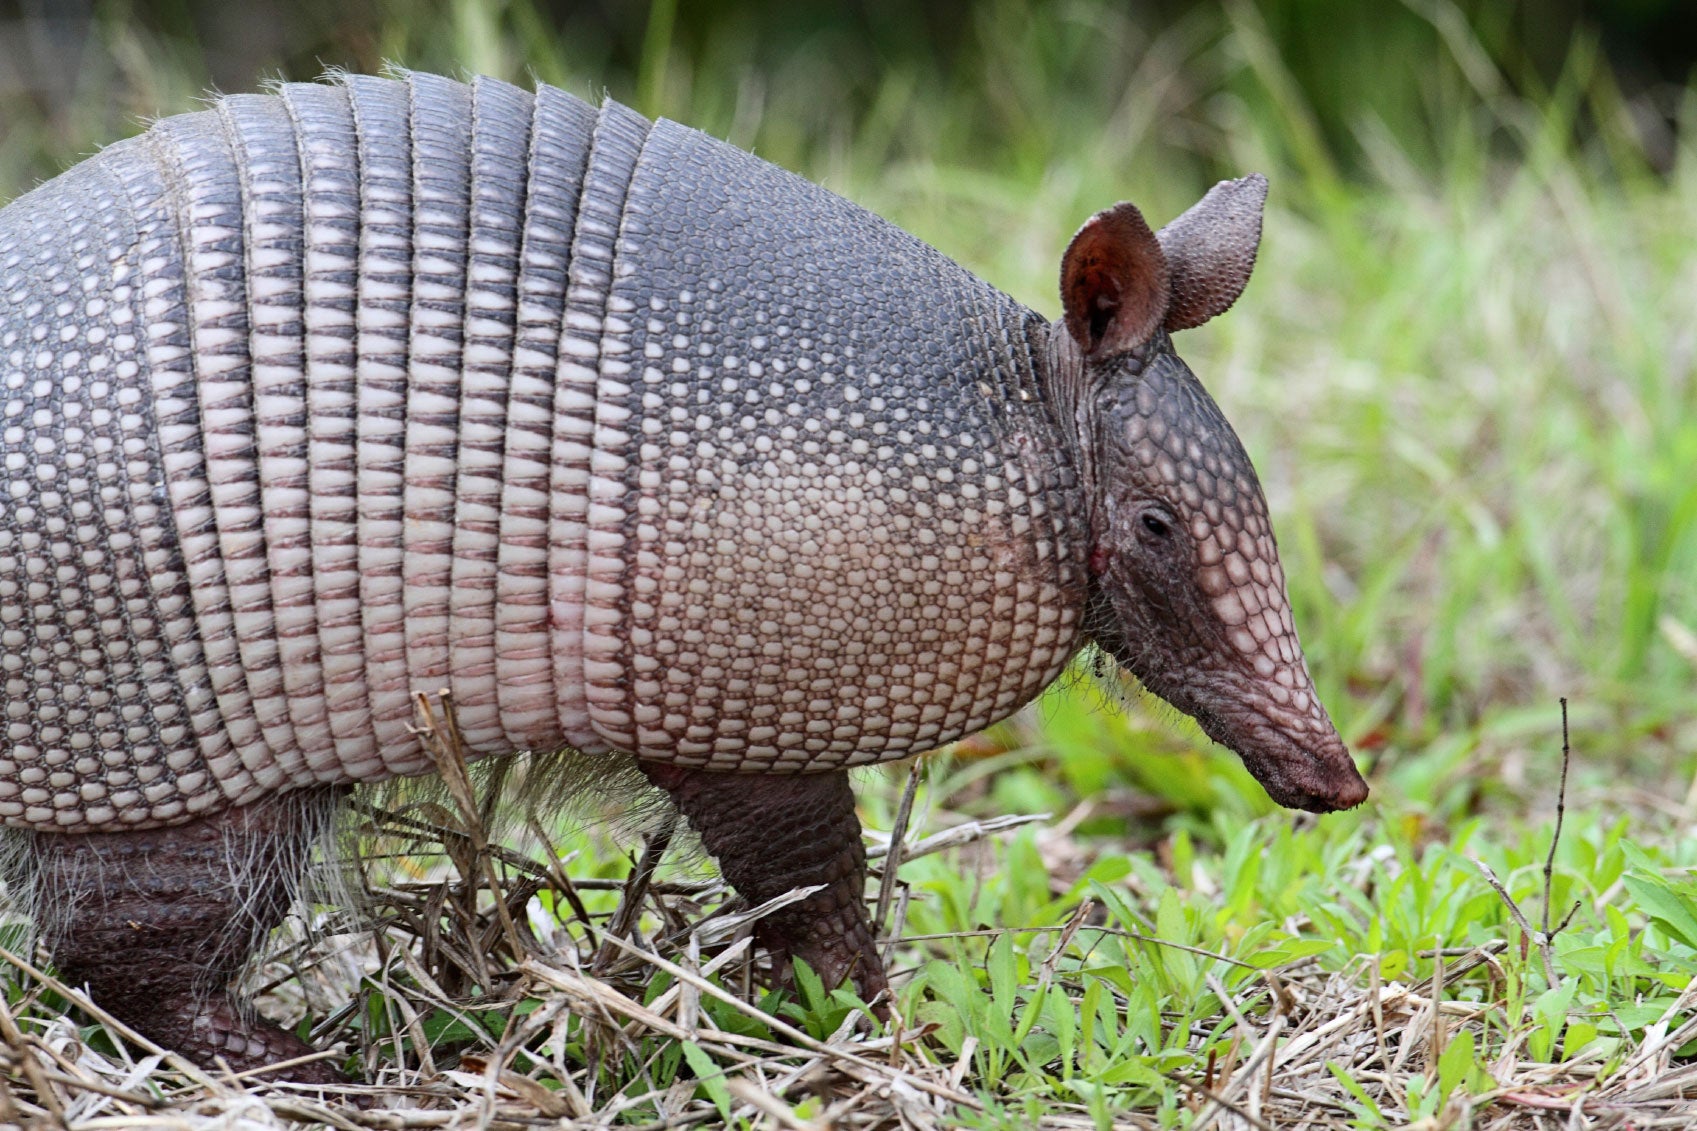 Armadillo Control: How To Get Rid Of Armadillos